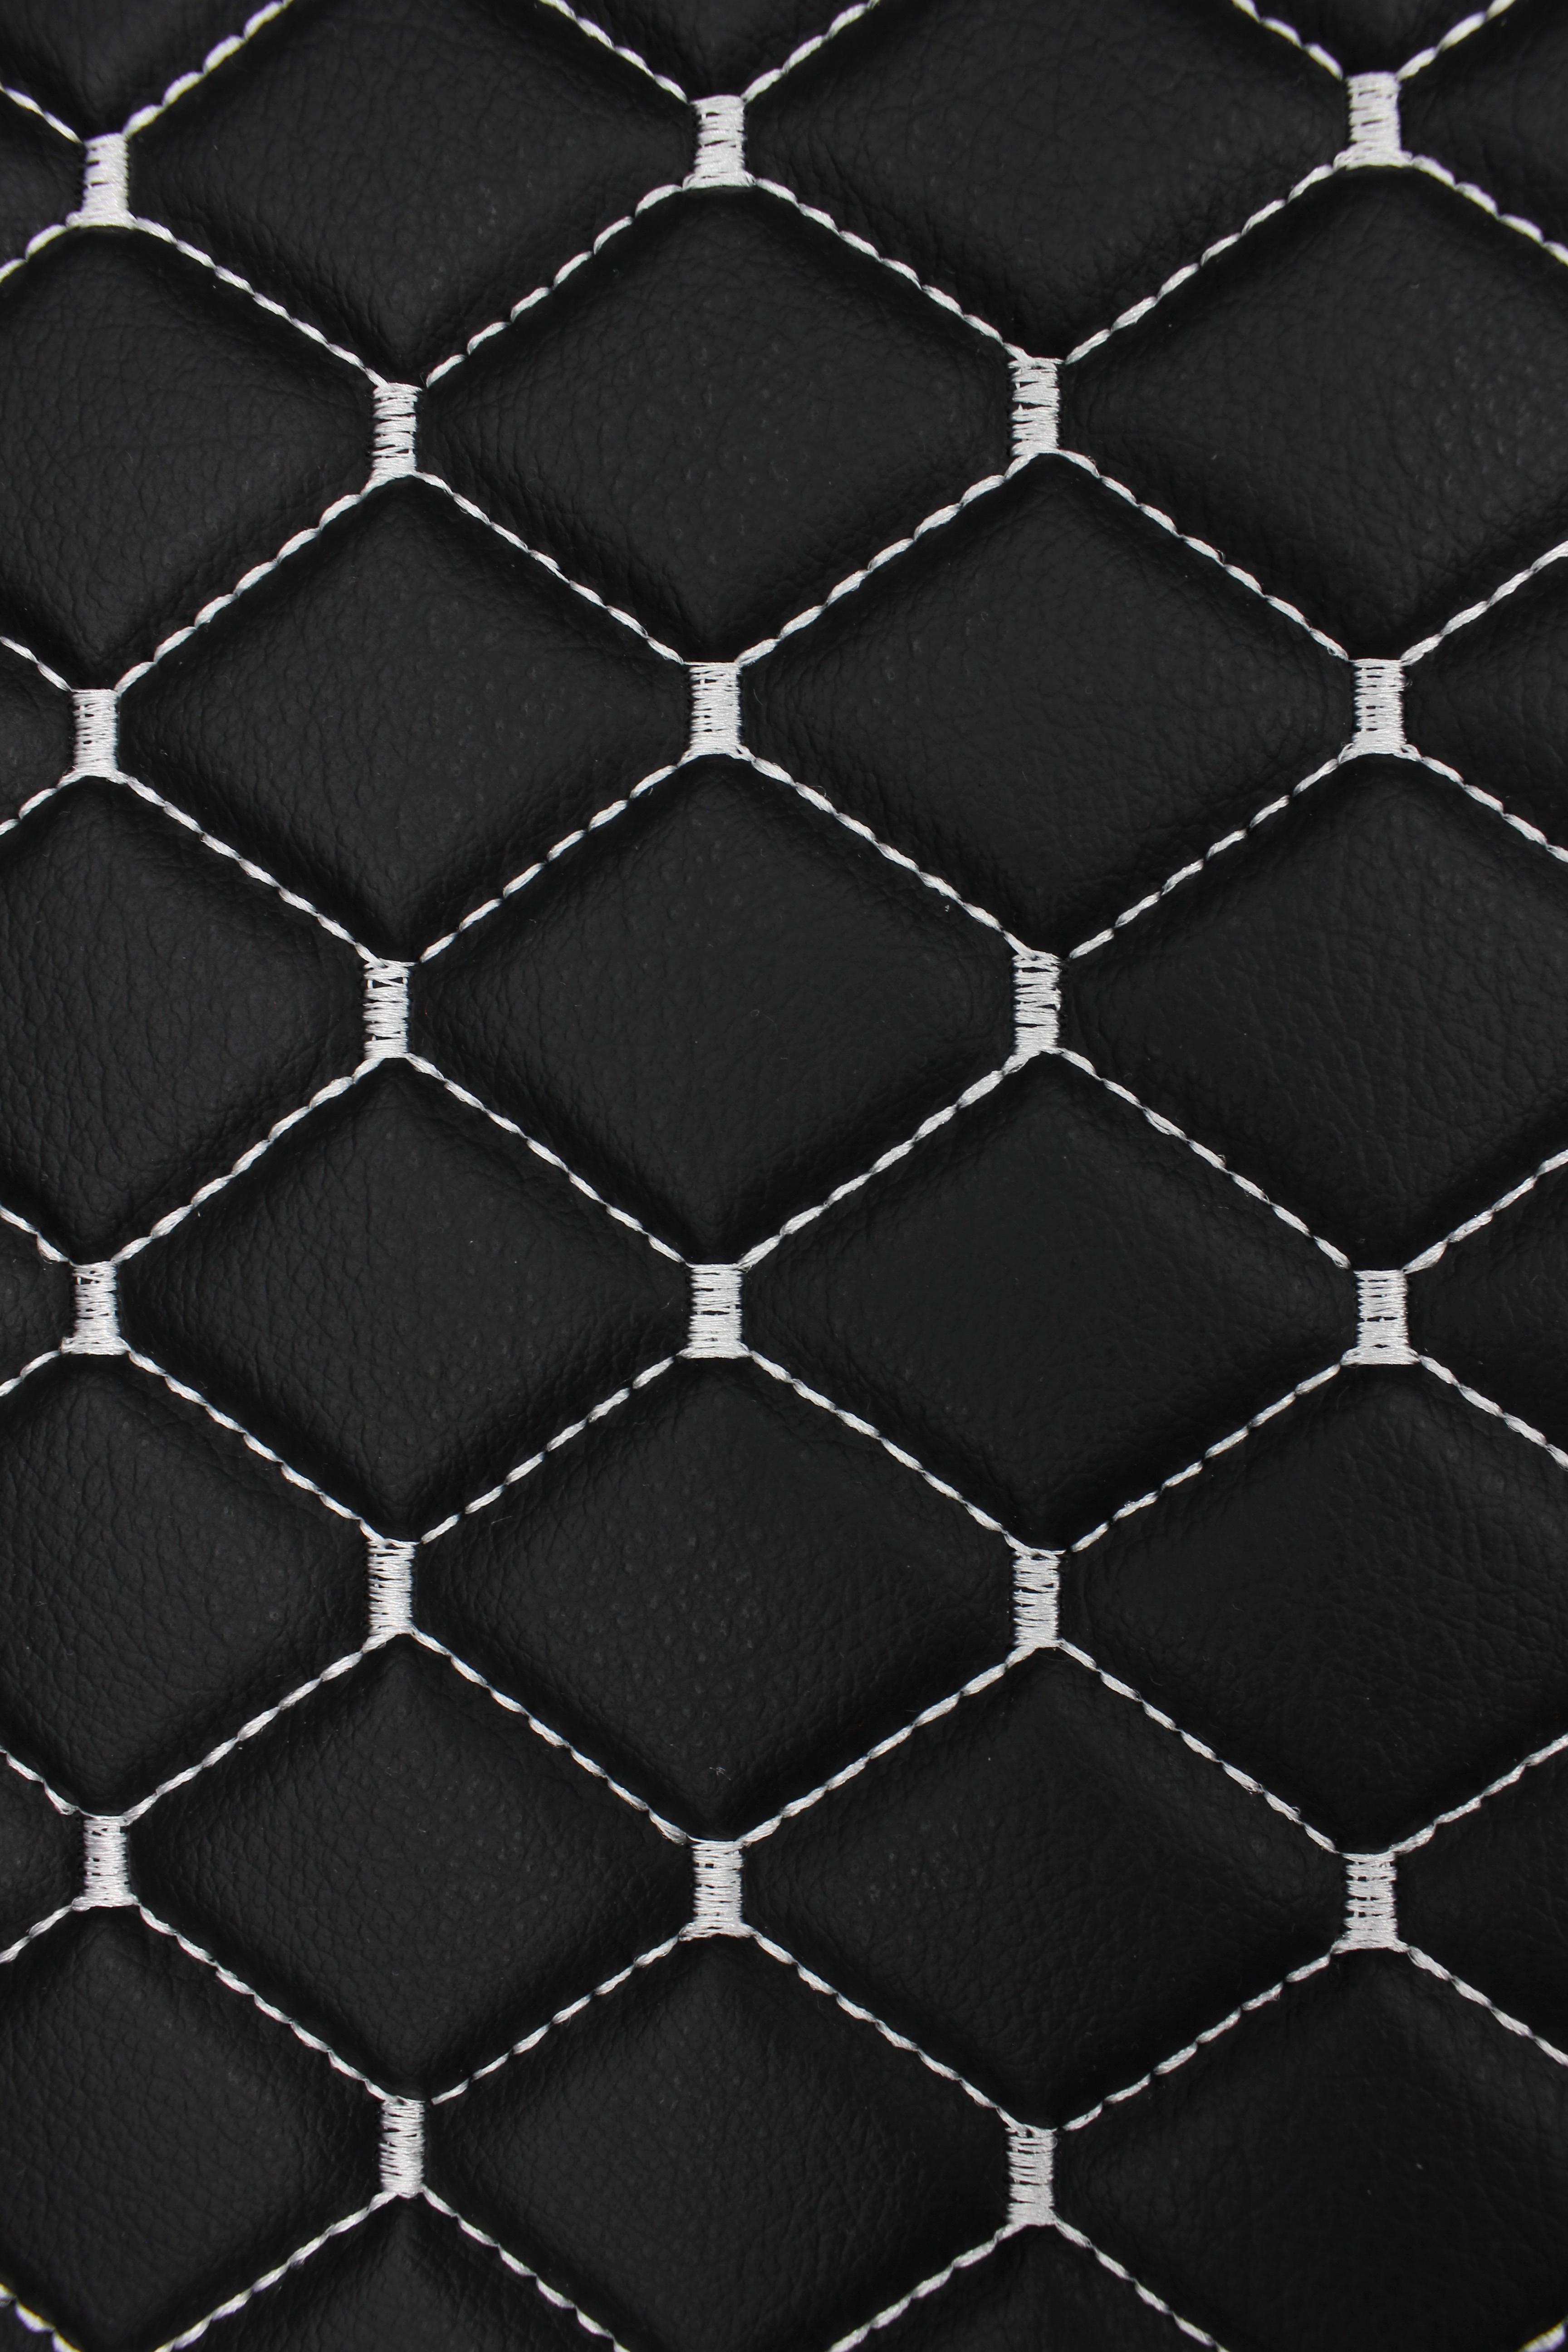 White Quilted Black Vinyl Faux Leather Car Upholstery Fabric | 2"x2" 5x5cm Diamond Stitch with 5mm Foam Backing | 140cm Wide | Automotive Projects